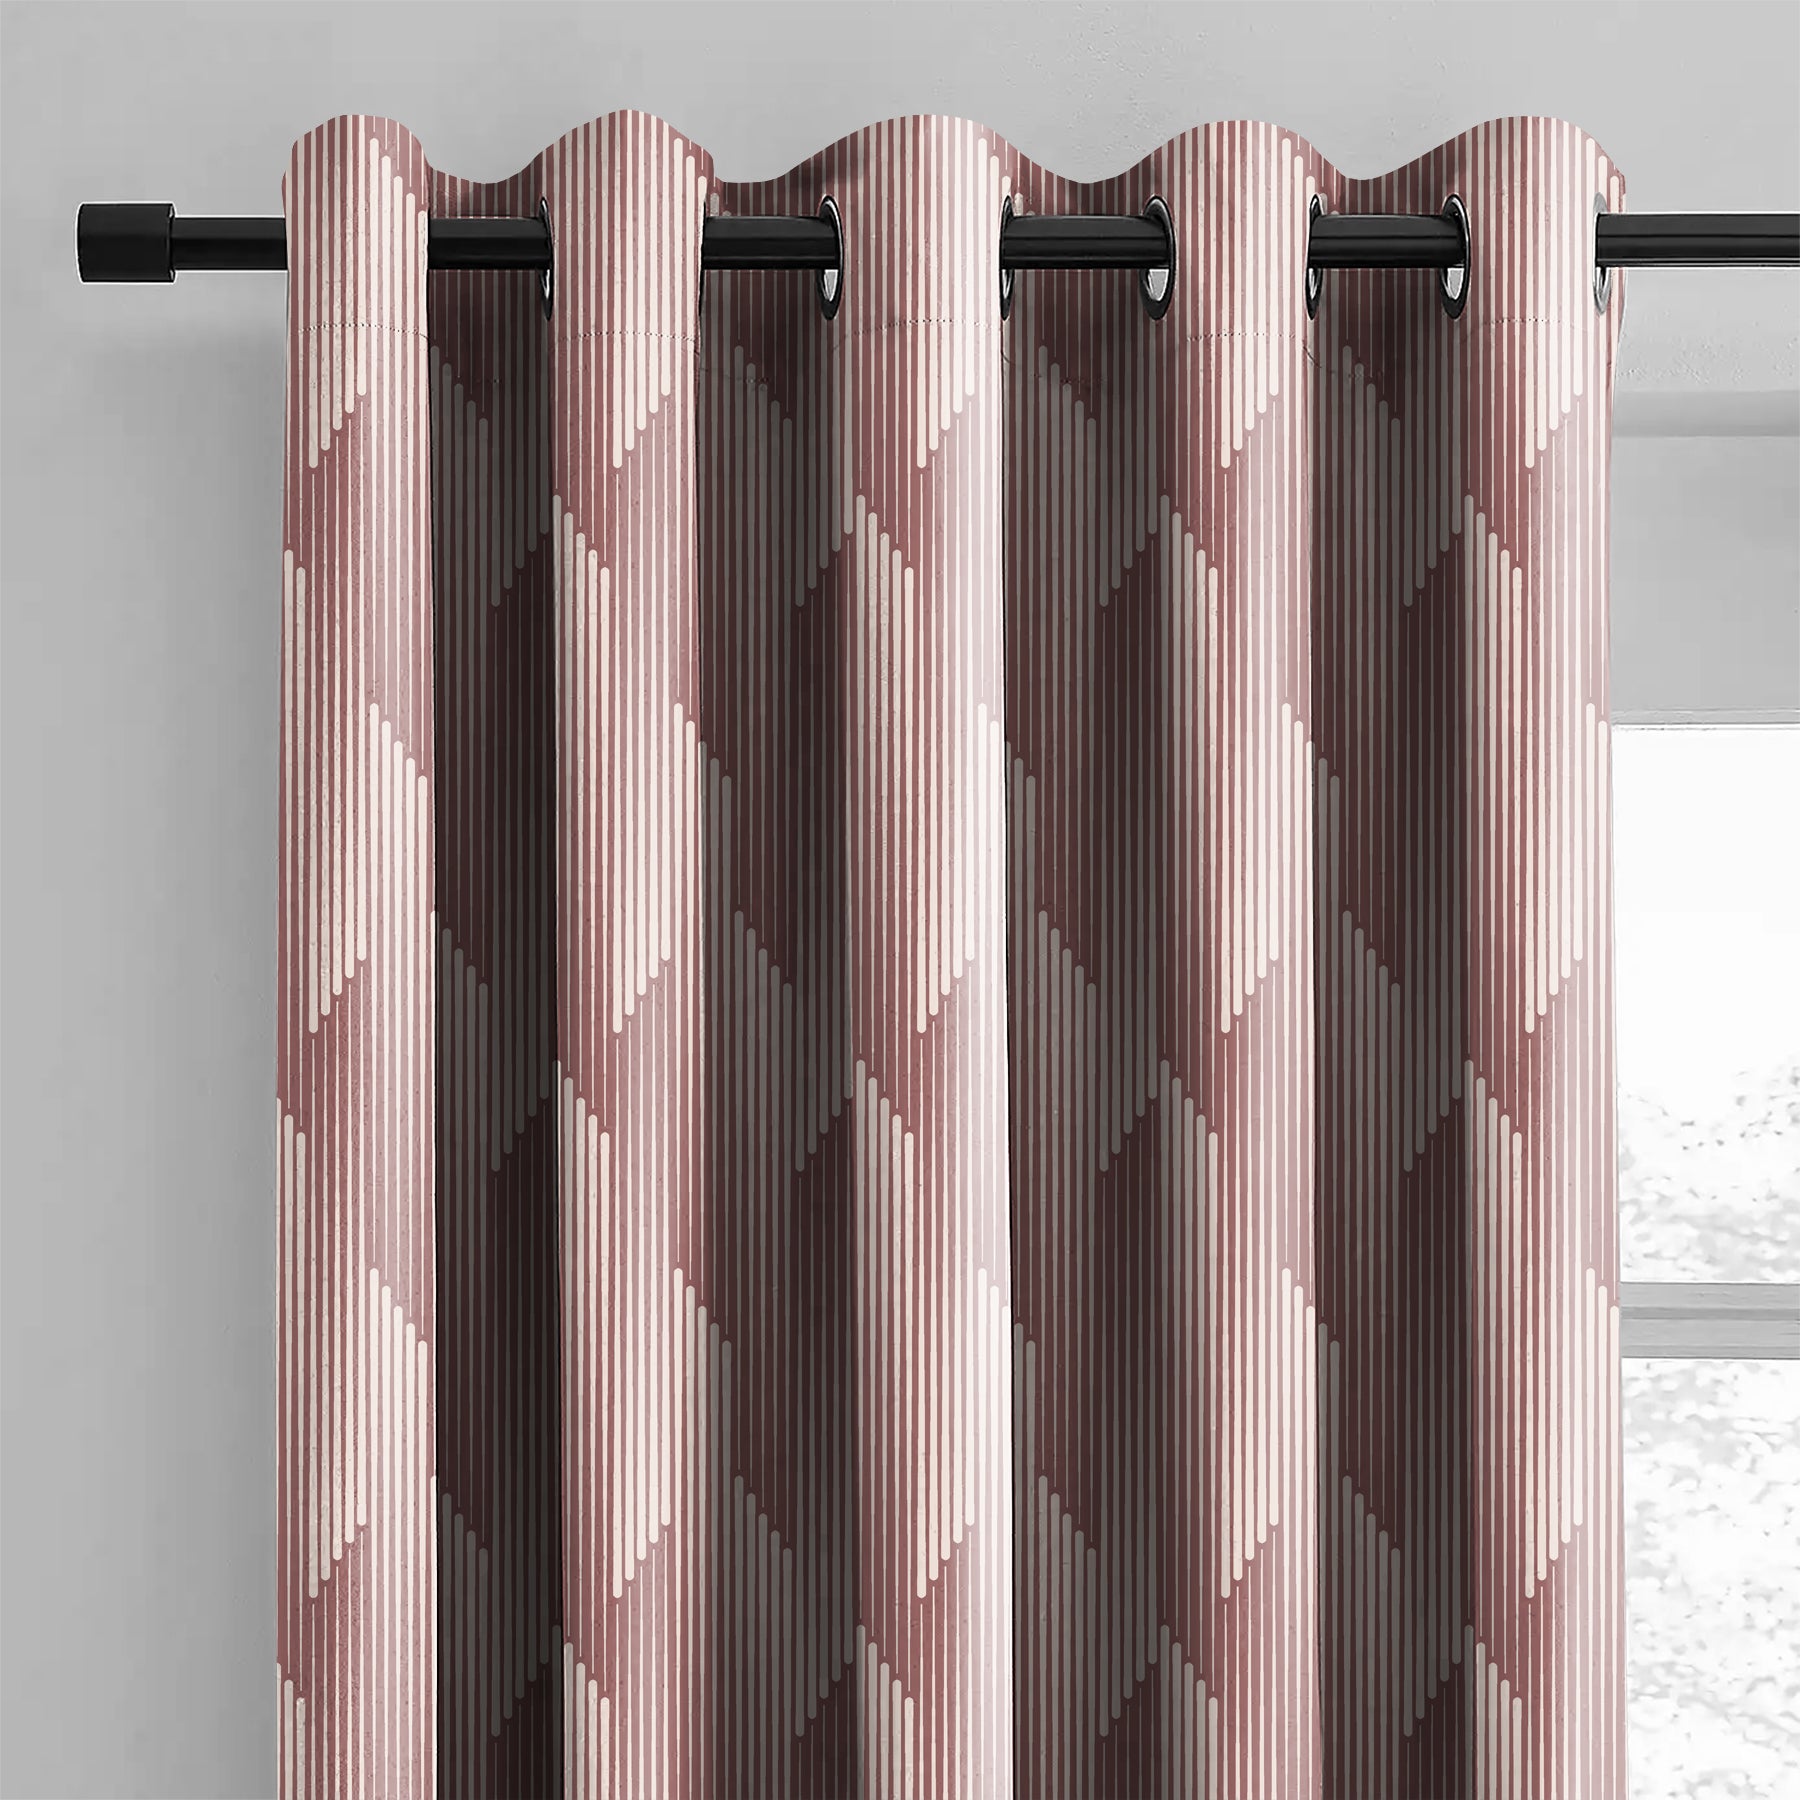 OSLO M-PINK BLACKOUT CURTAIN